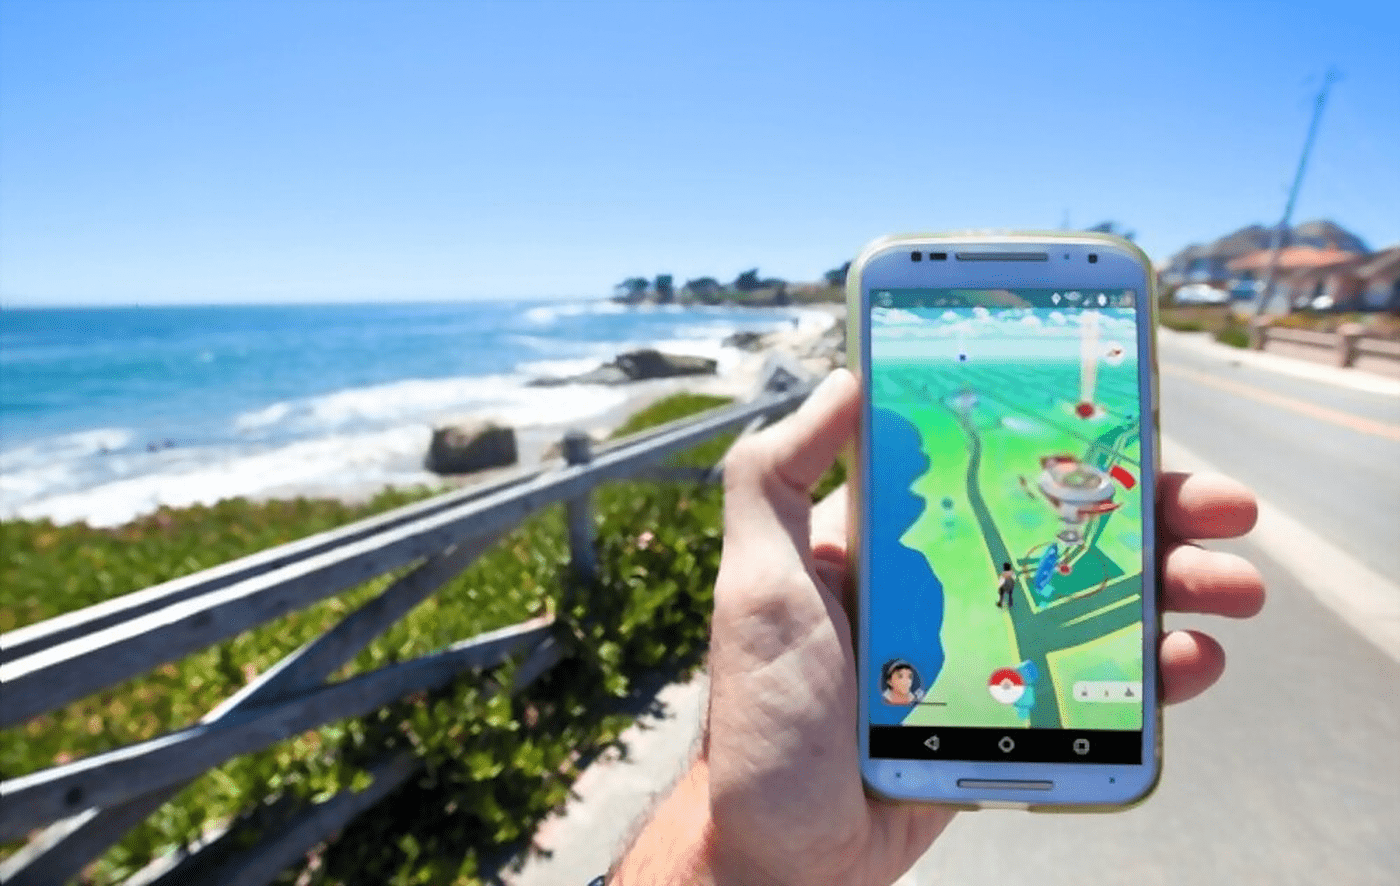 How To Change The Location In Pokemon Go?